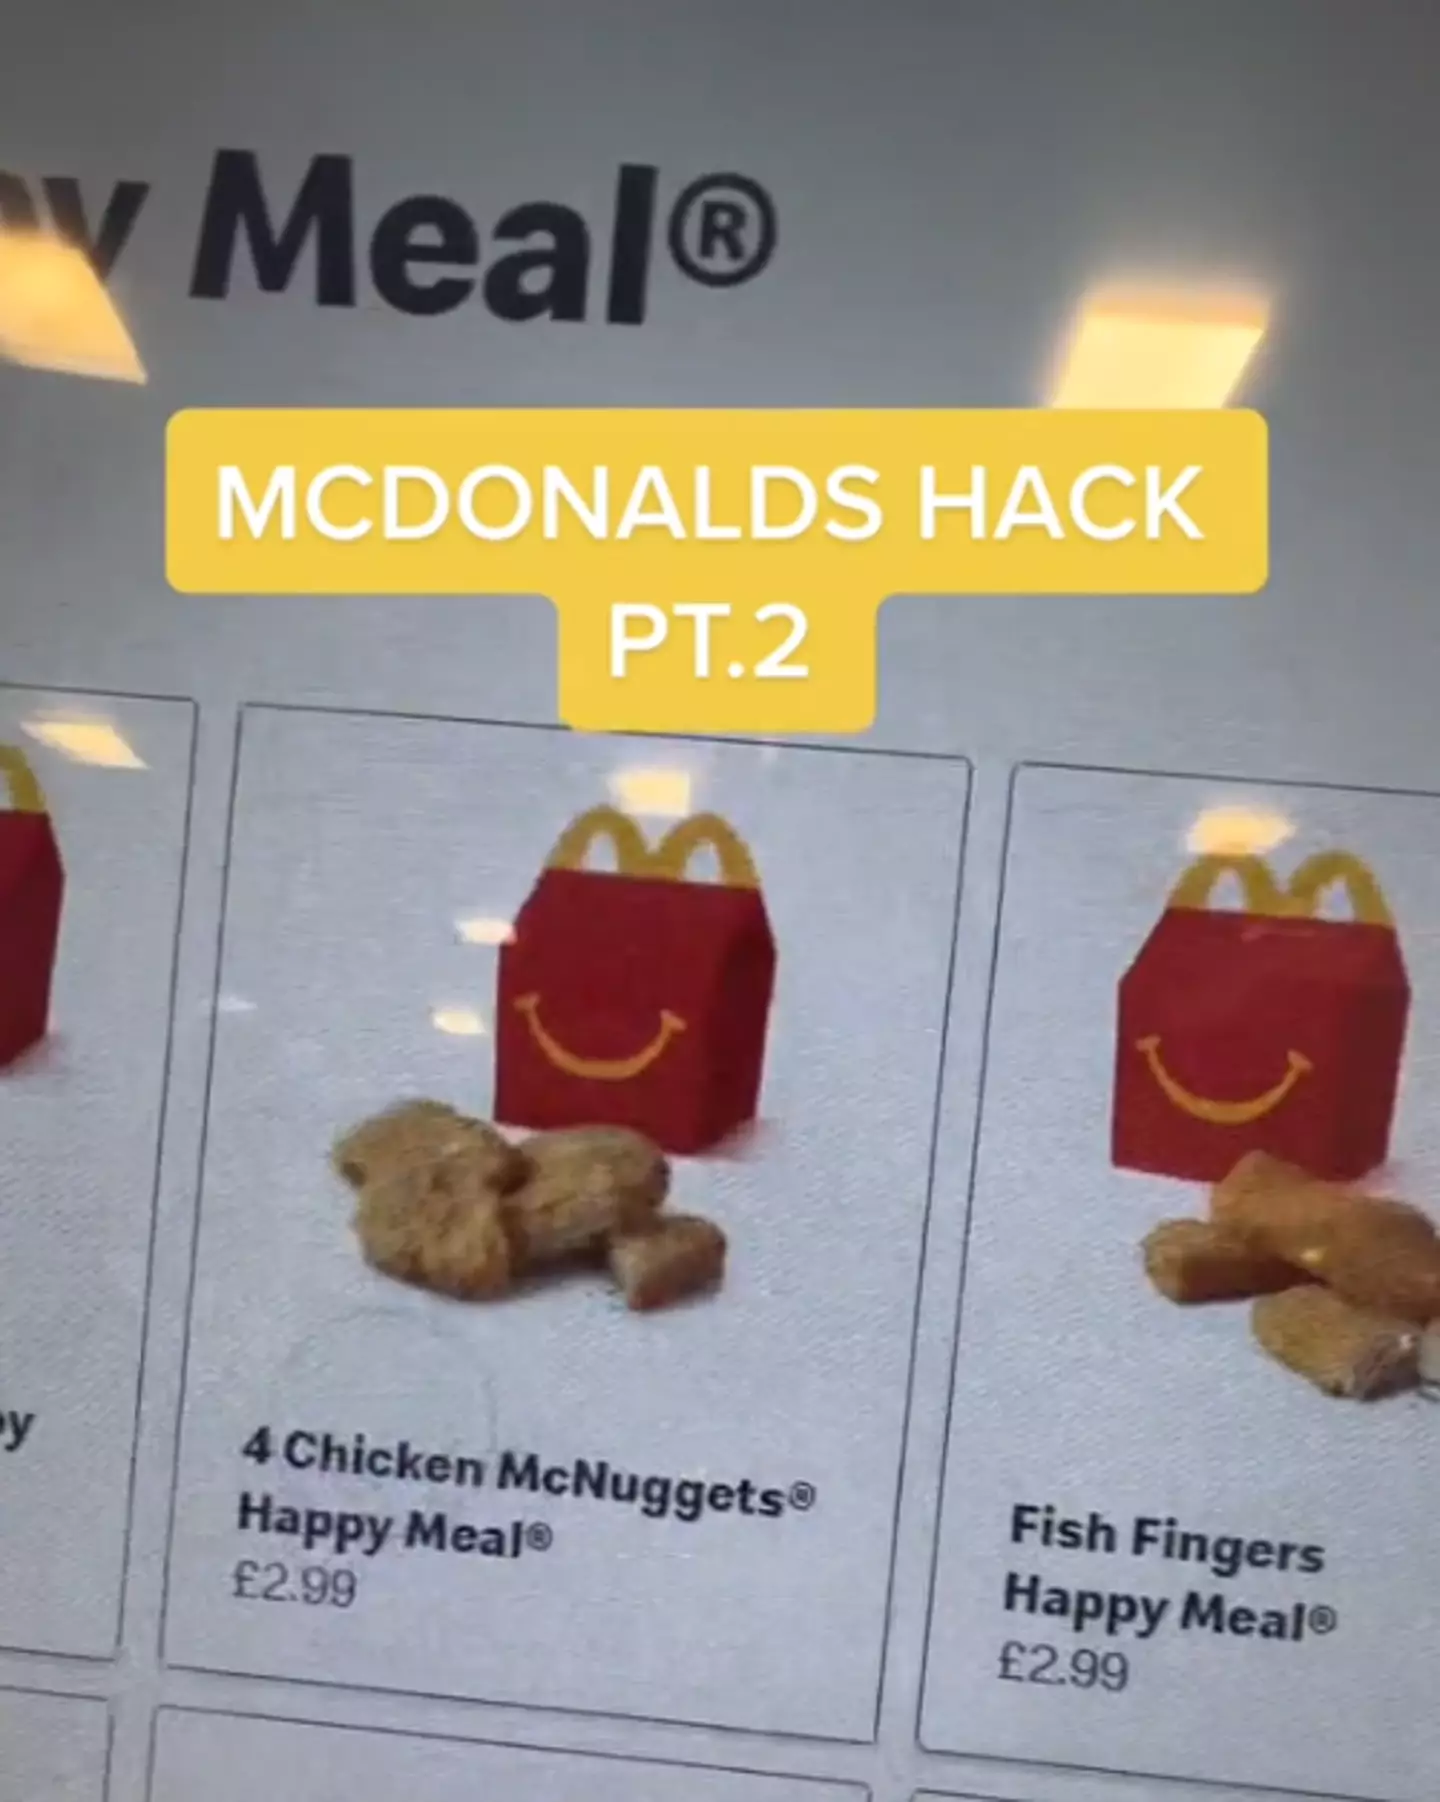 Some Maccies lovers have said they are now going to do the hack.